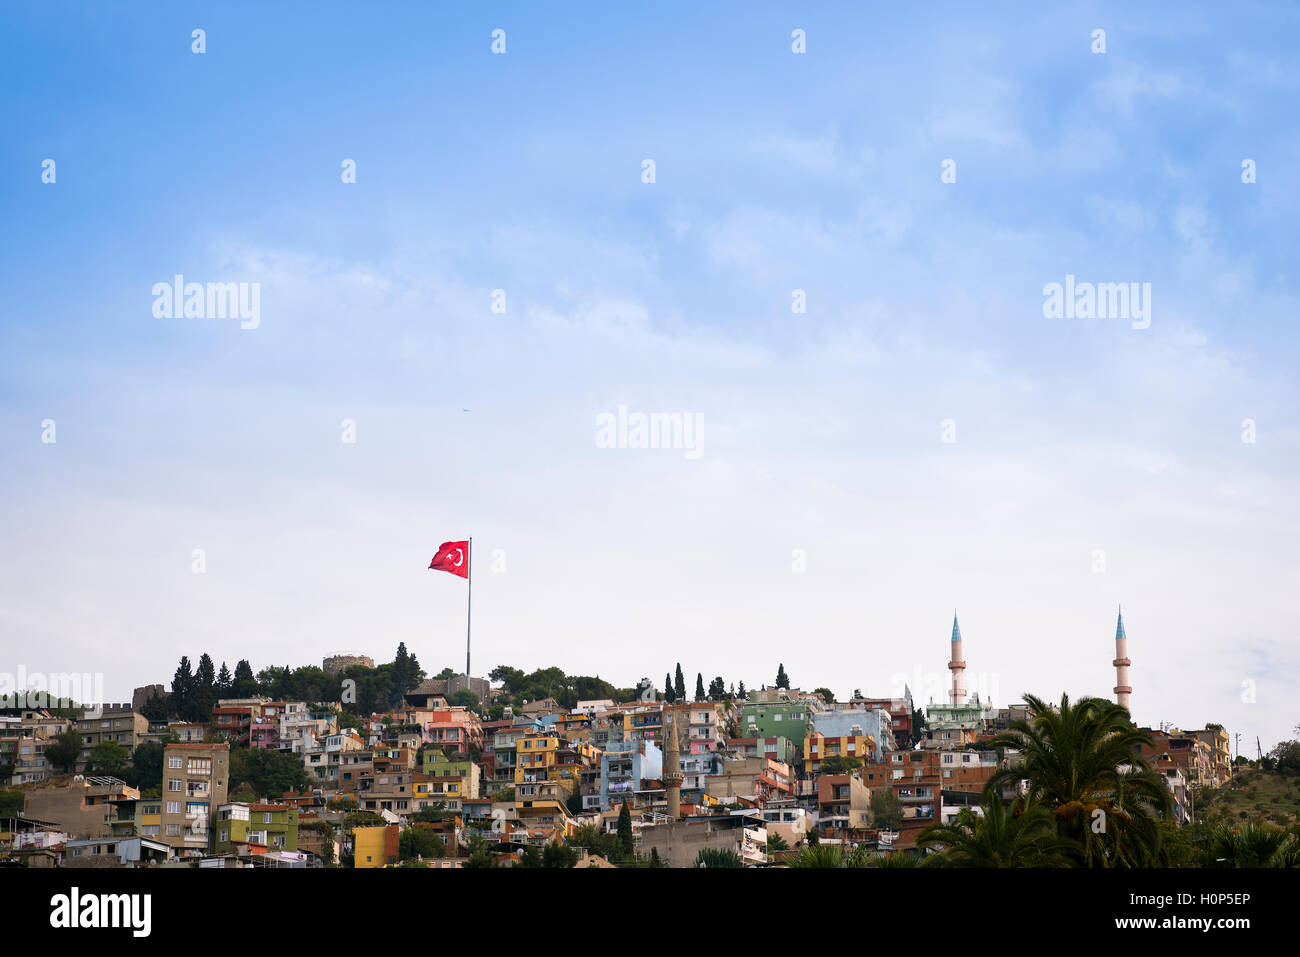 Region of Kadifekale landscape from agora ancient city, Turkish flag and two minarets in the frame. Stock Photo